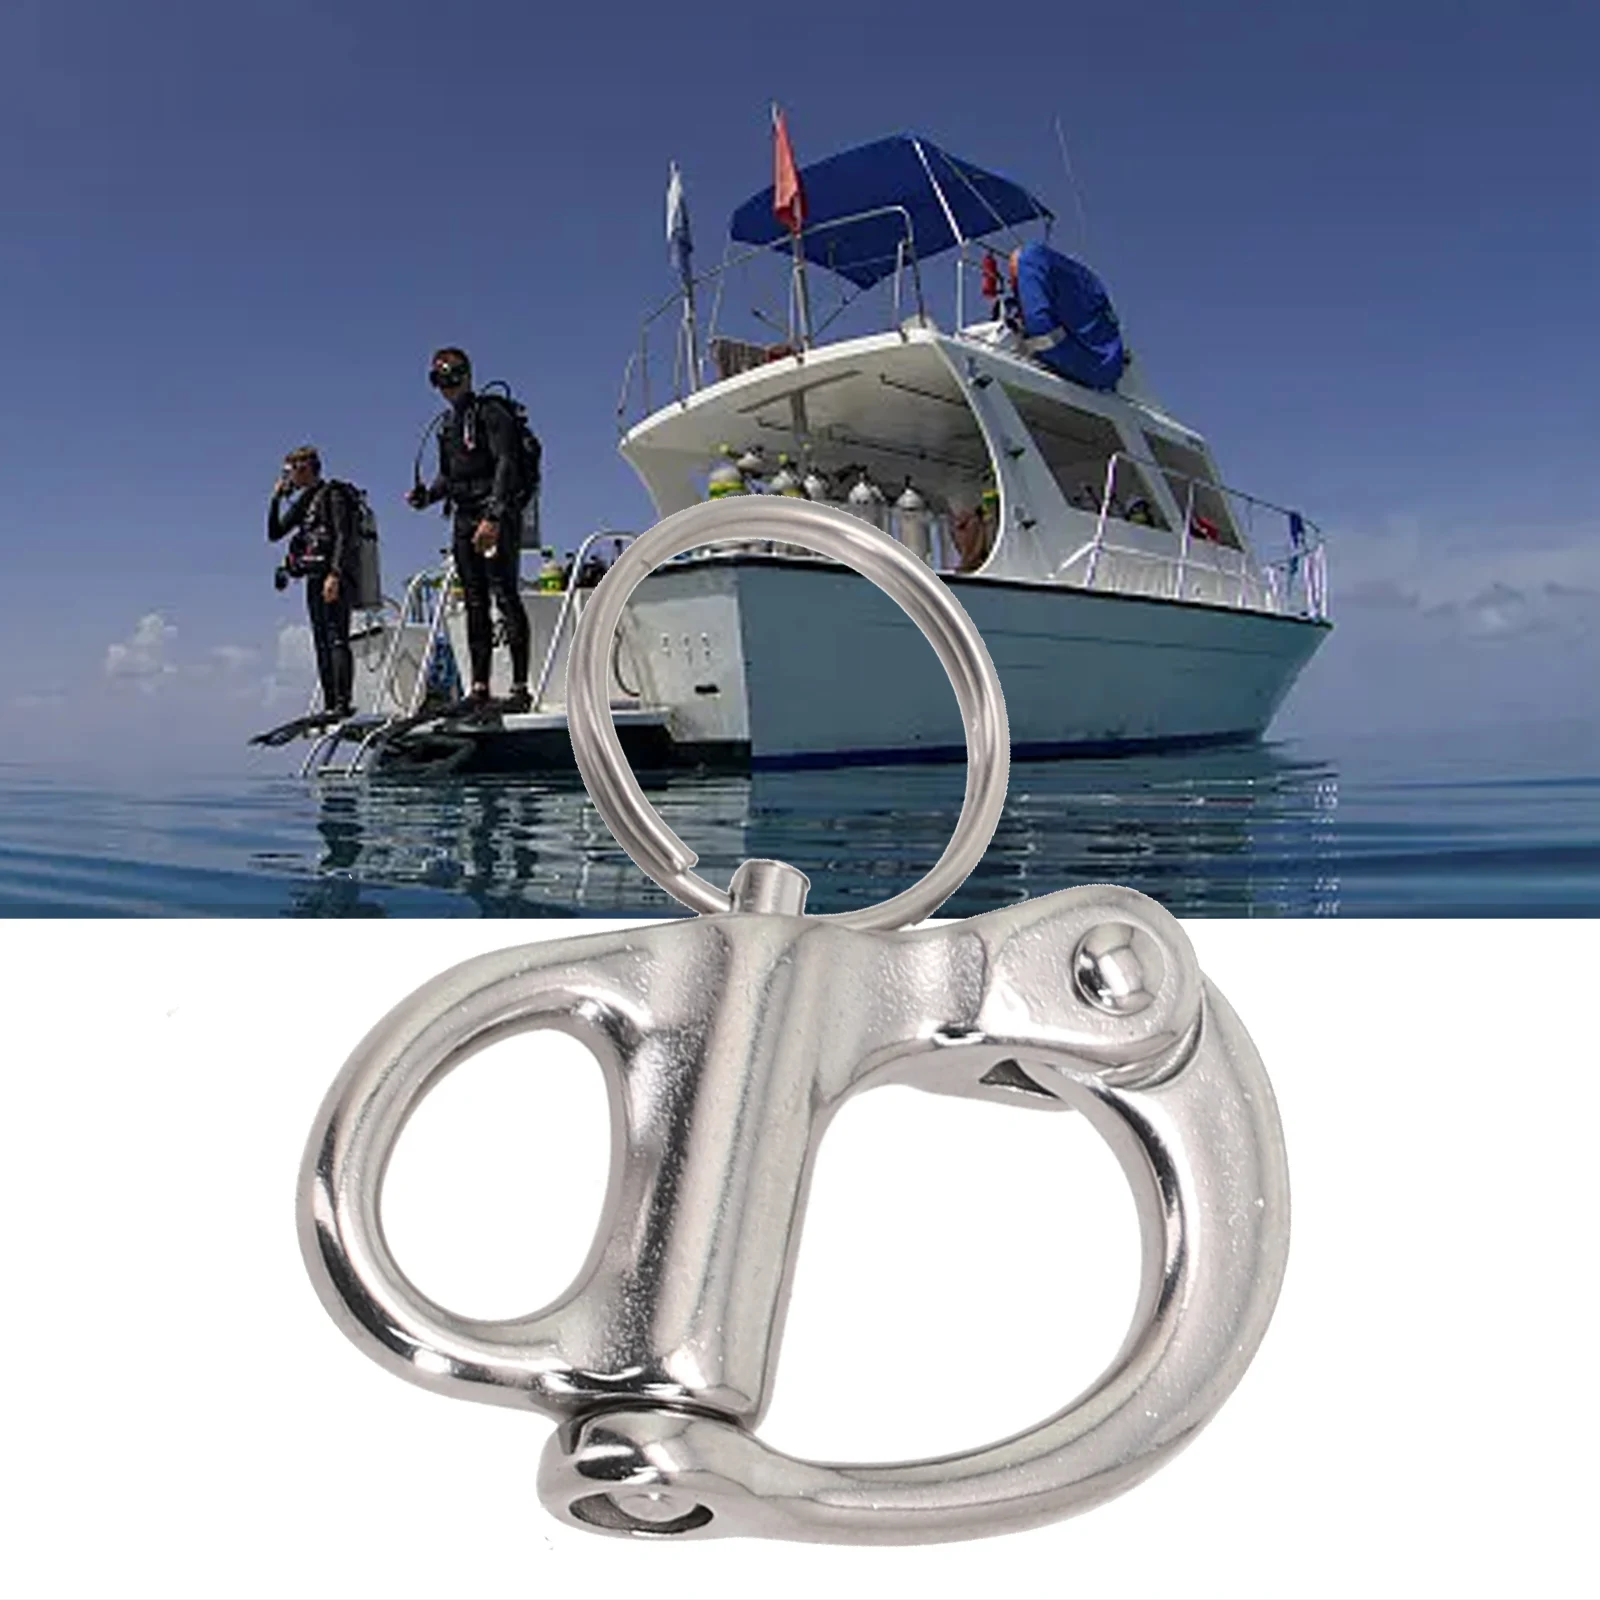 1PCS 35/52/69/96MM Quick Release Boat Anchor Chain Eye Shackle Swivel Hook Snap Marine Tools 316/304 Stainless Steel Accessory 30pcs 19mm metal belt clip buckles swivel lobster clasp dog collar strap buckle carabiner snap hook diy backpack bag accessory